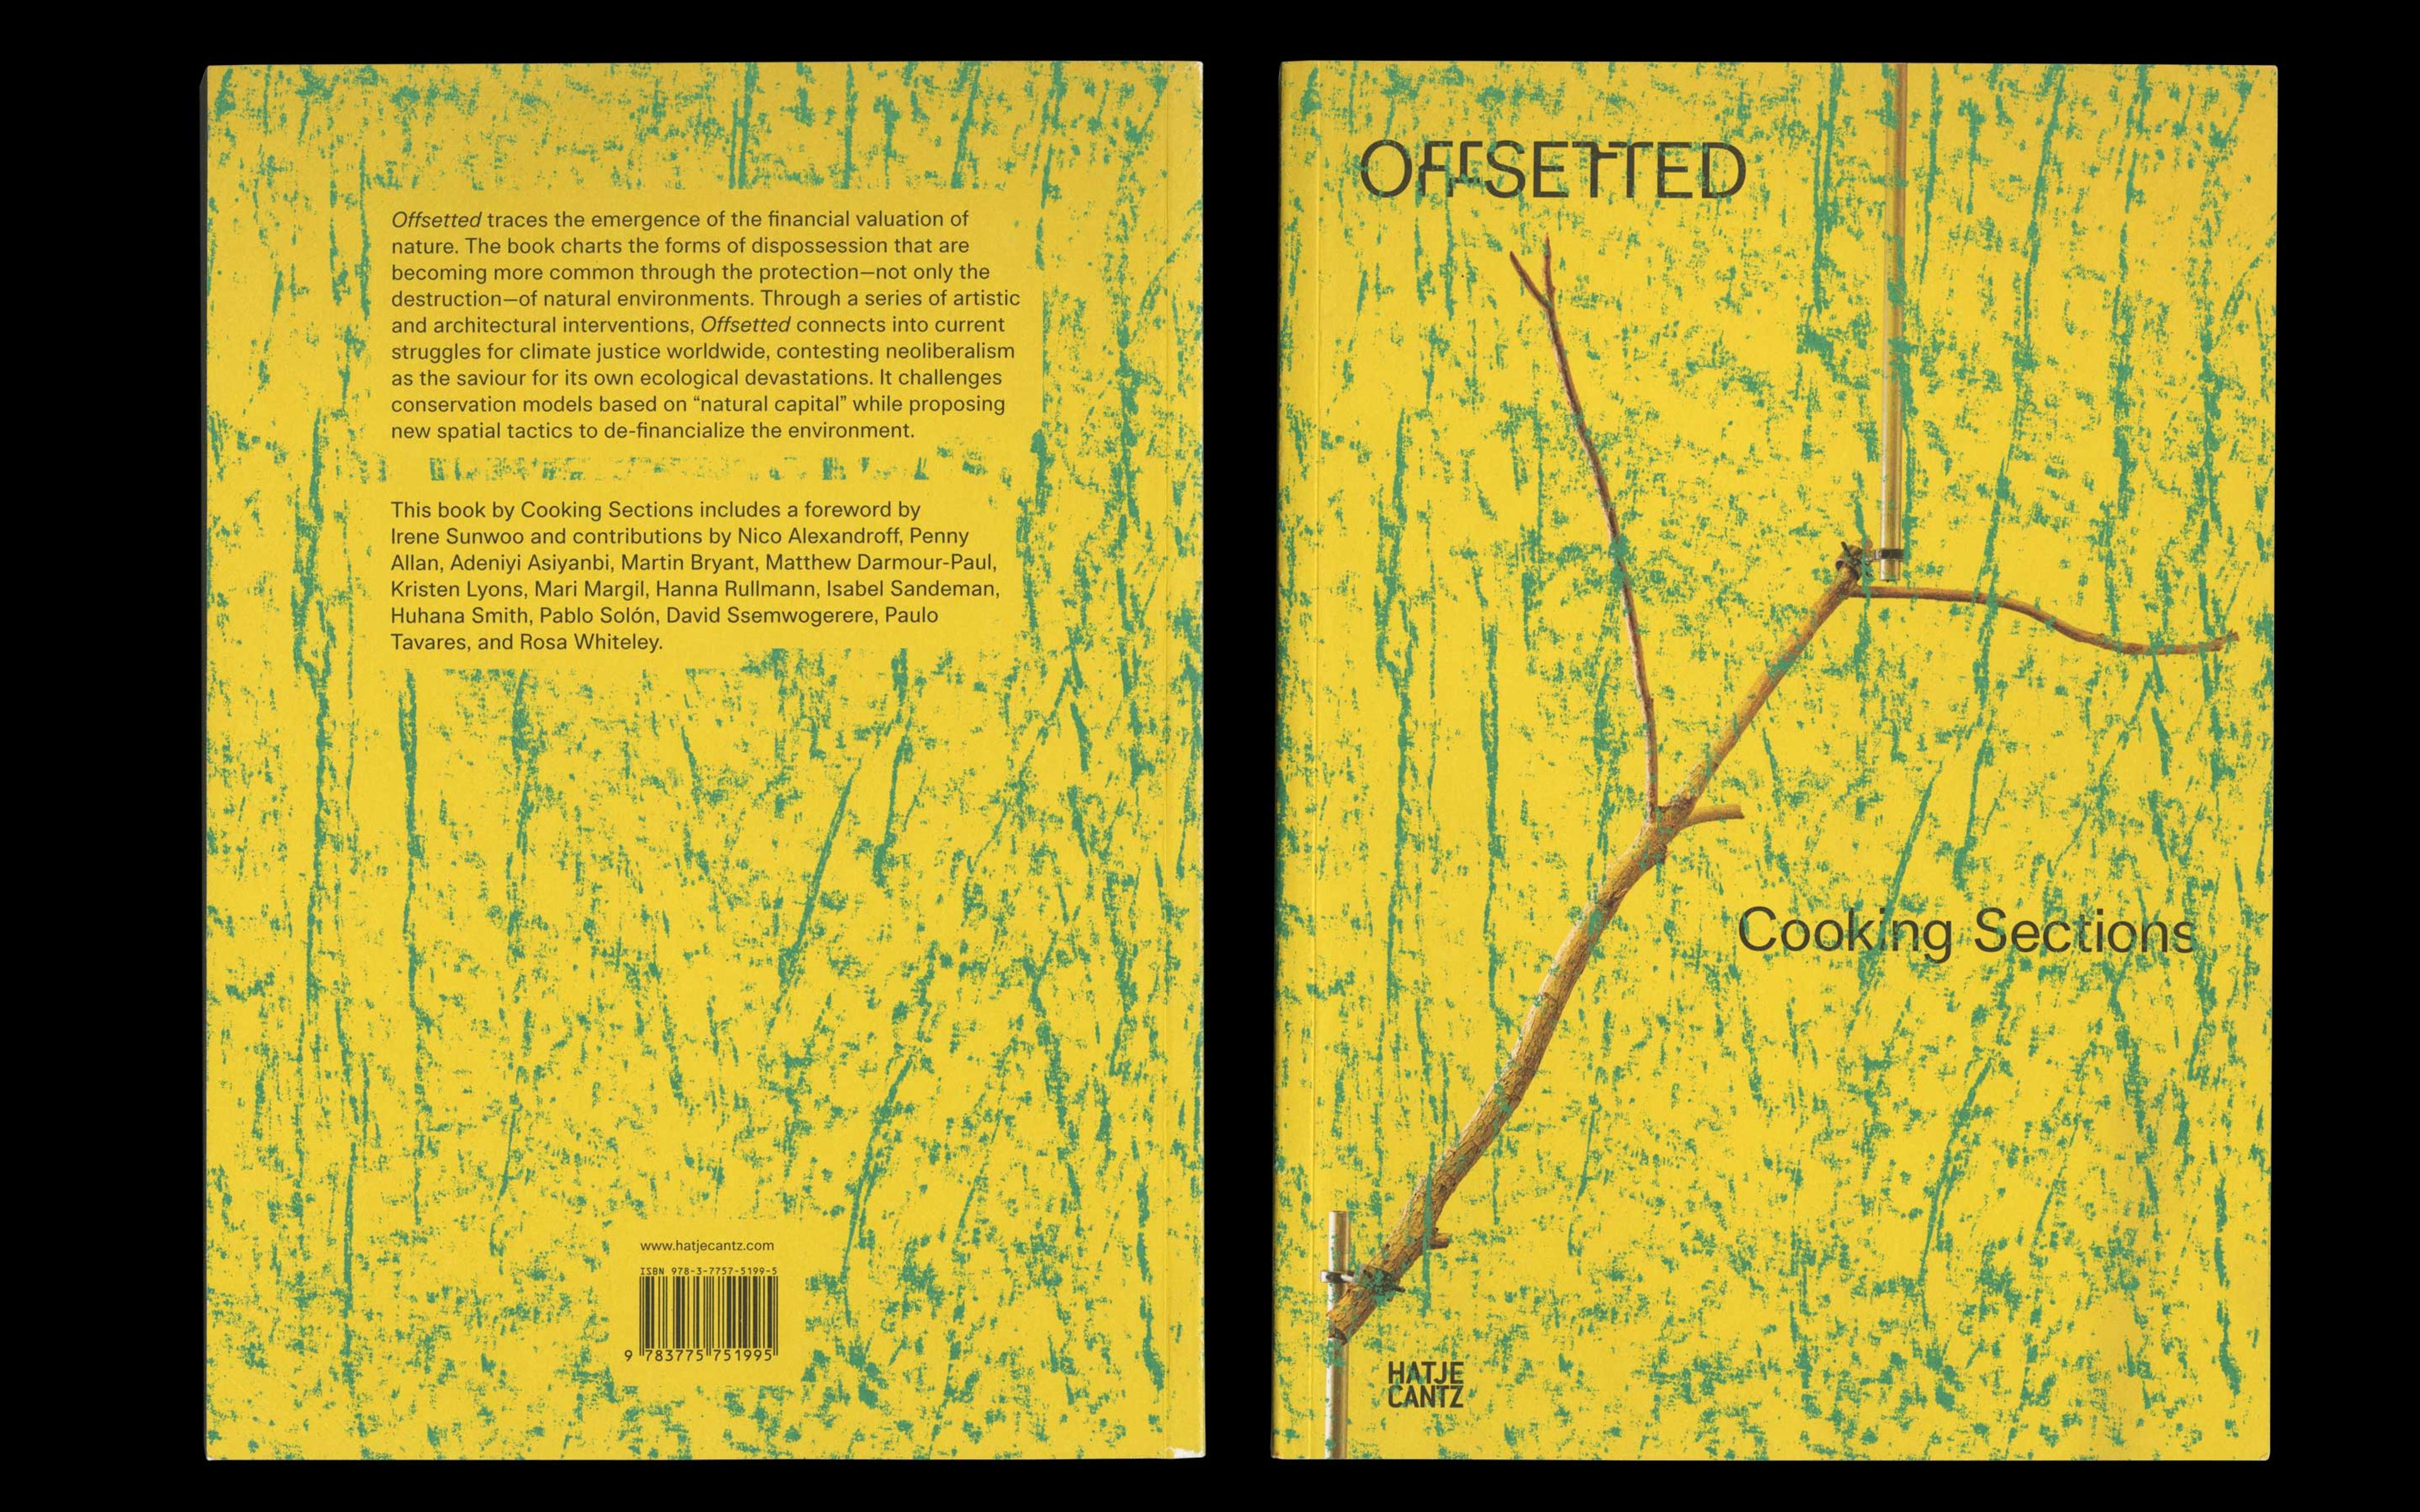 Scan of front and back cover of 'Offsetted' by Cooking Sections